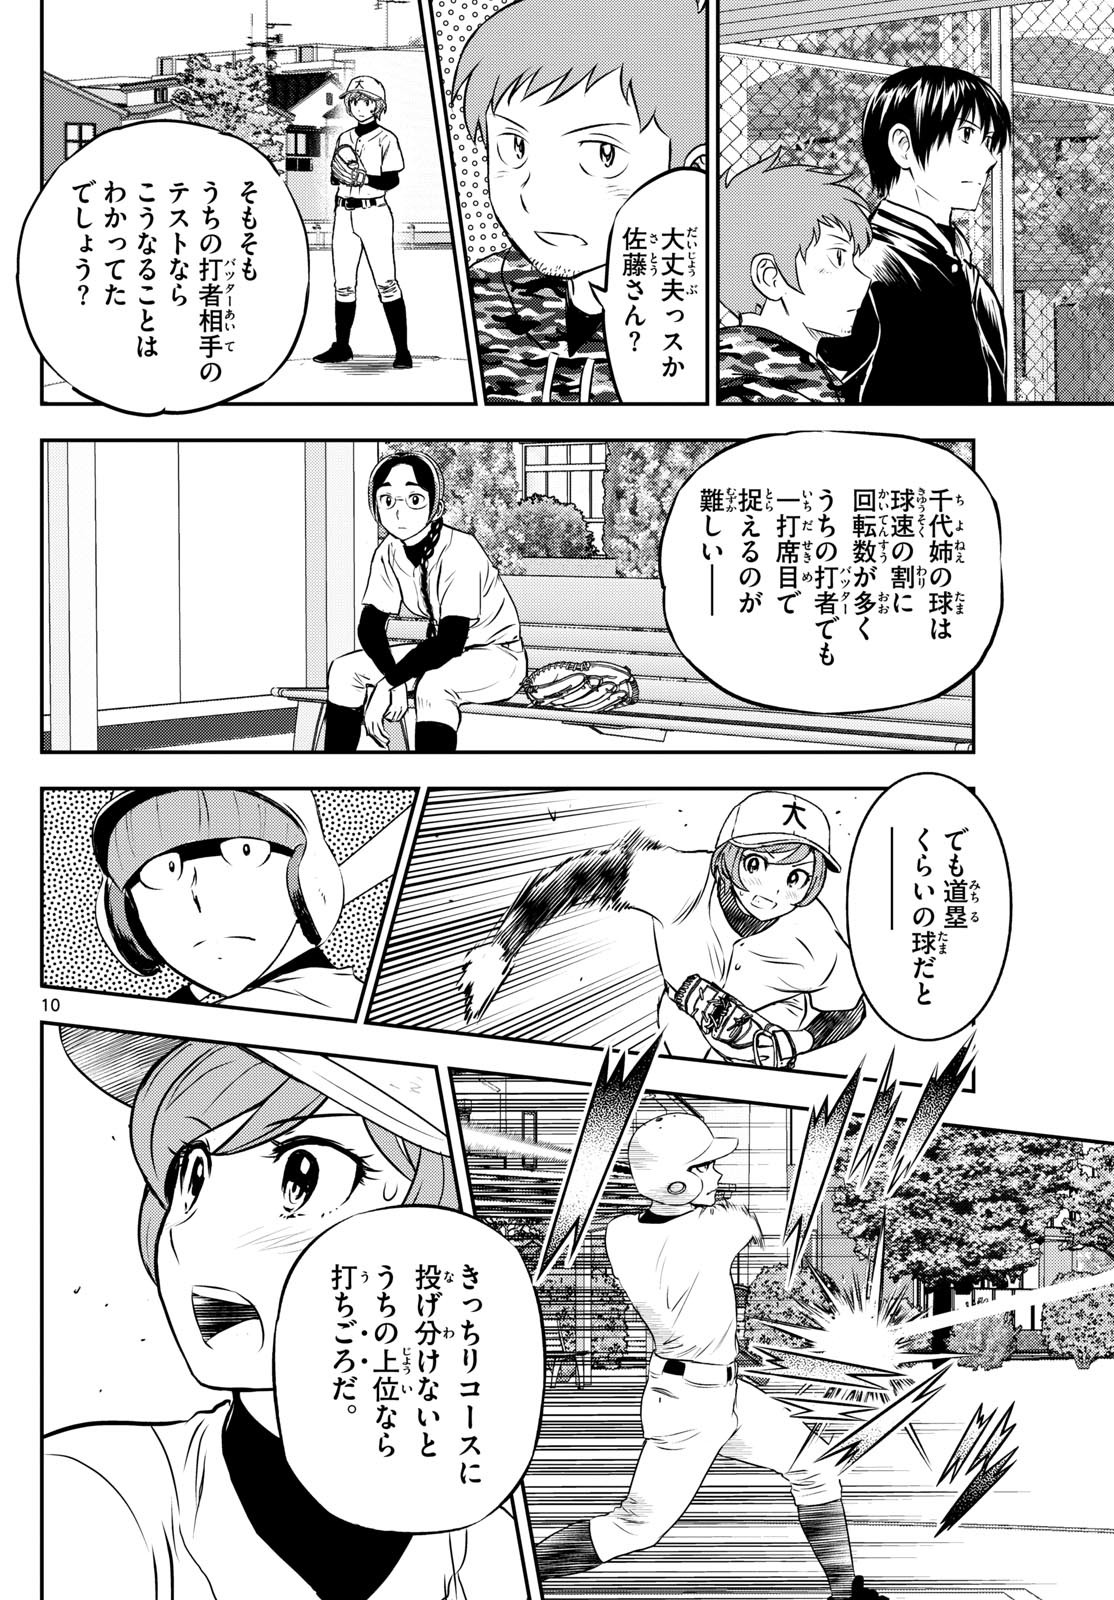 Major 2nd - メジャーセカンド - Chapter 281 - Page 10